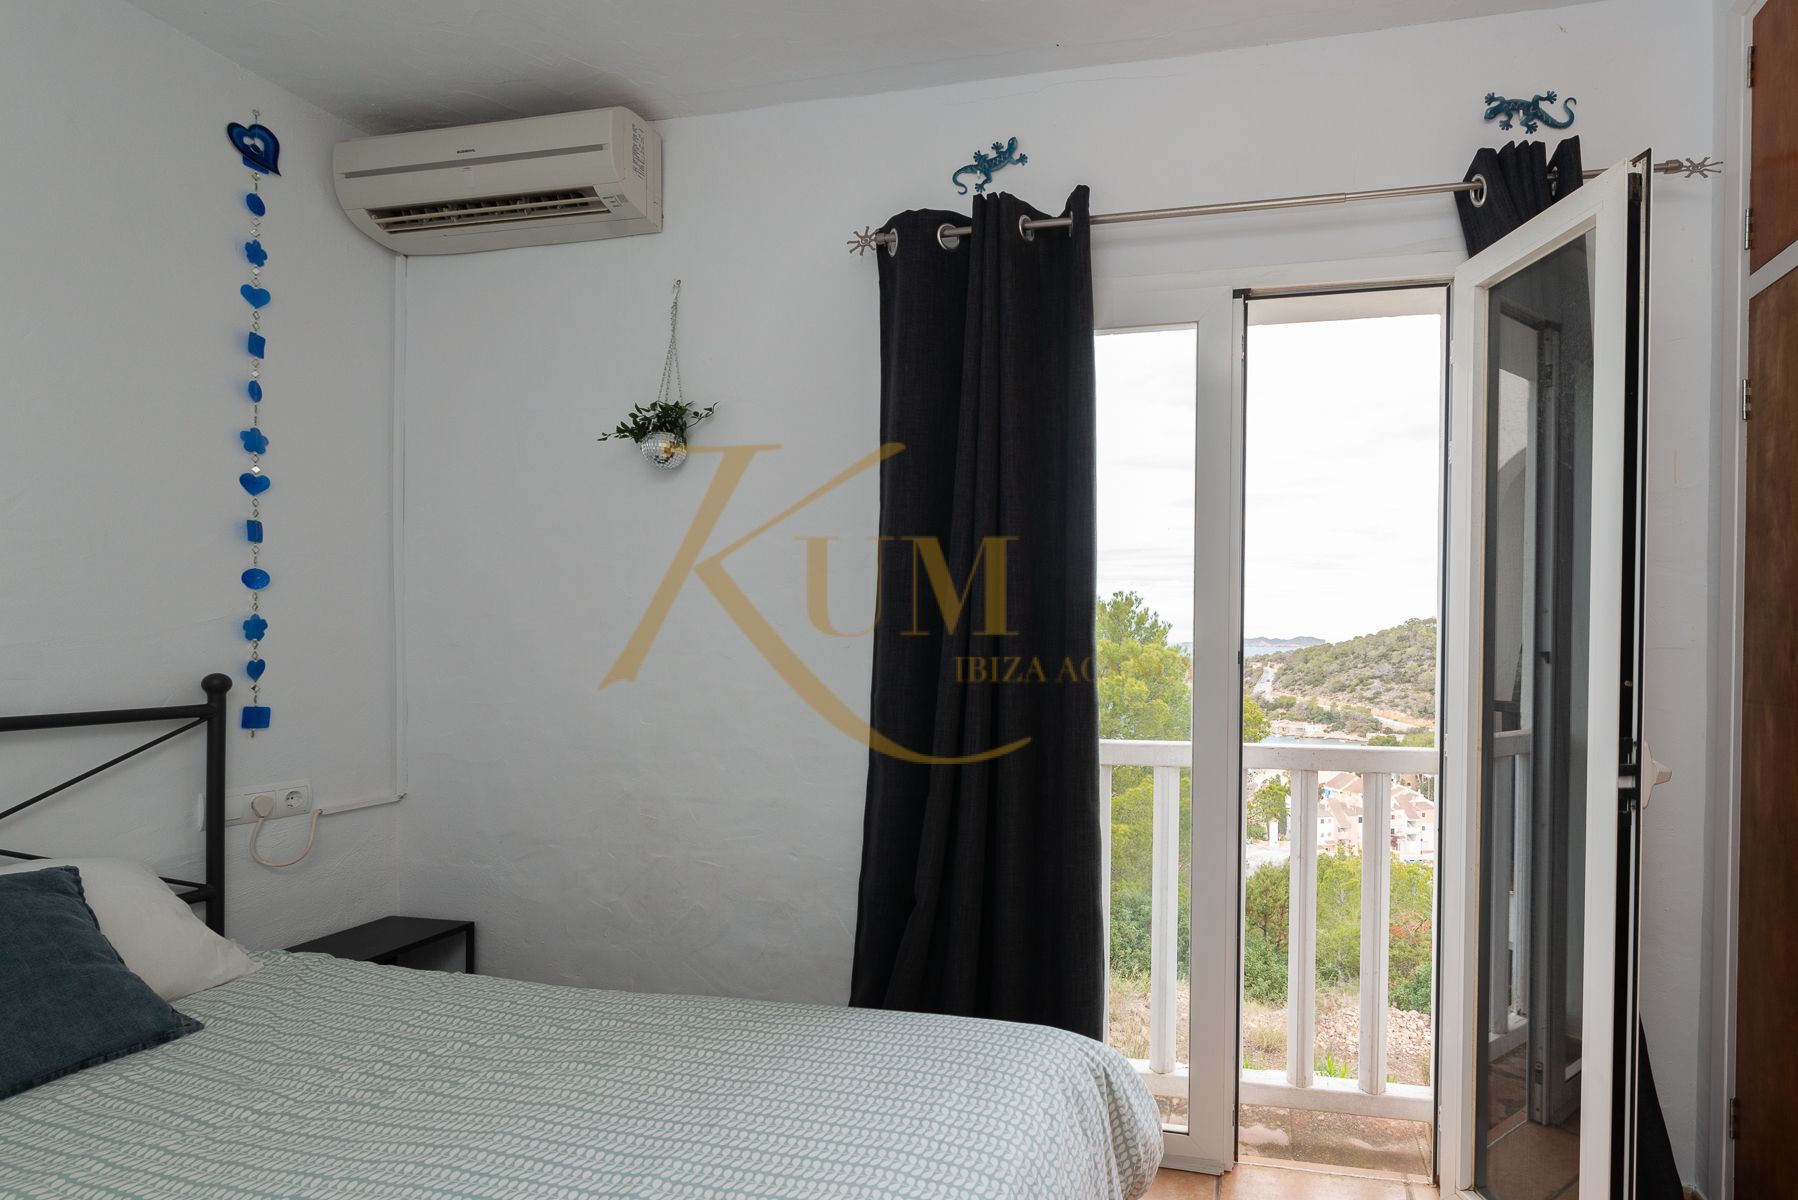 Apartment for rent minutes from La Cala.